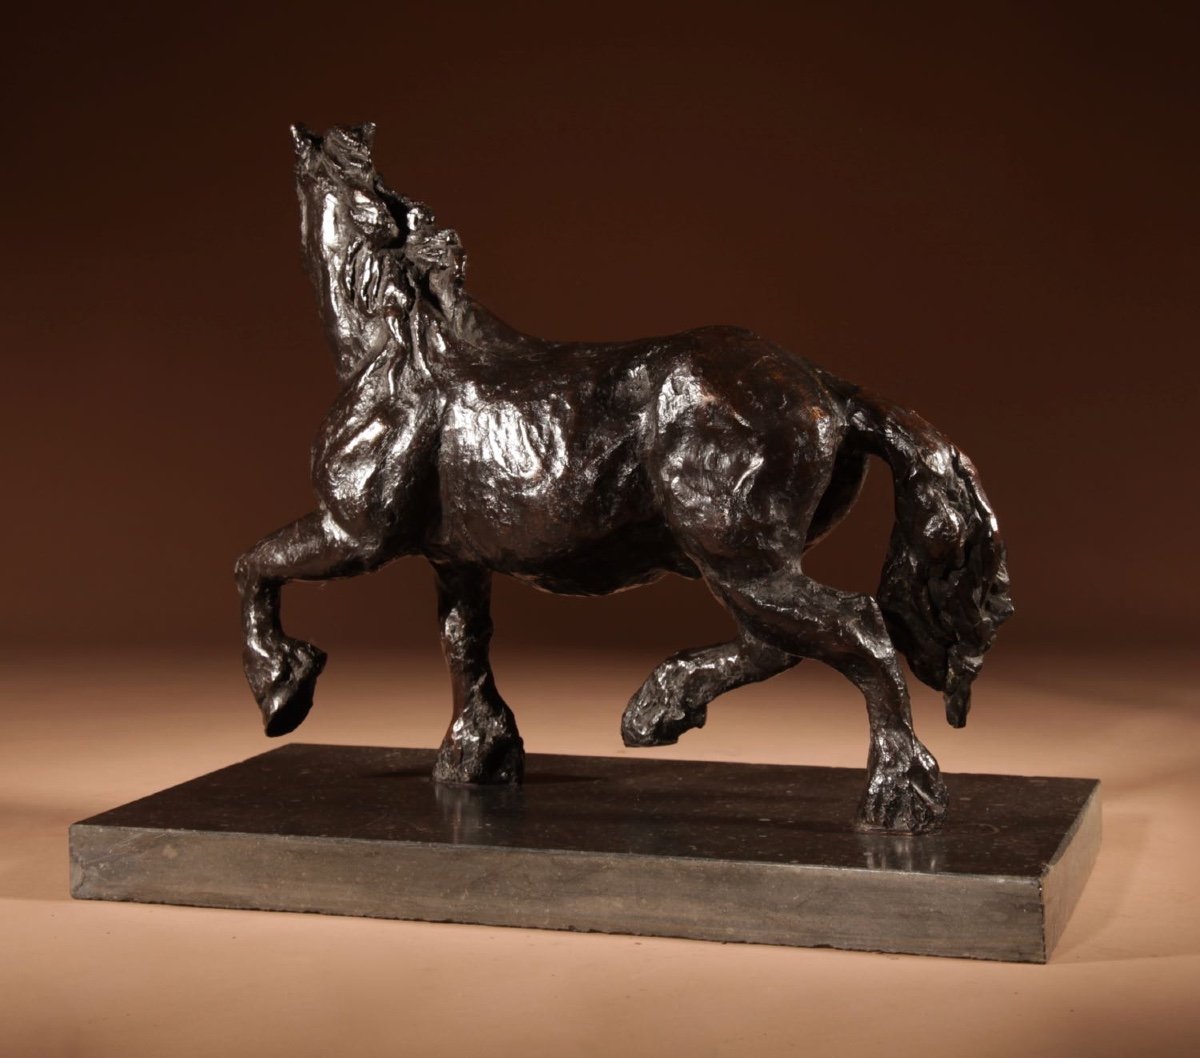 Draft Horse, A Powerful Bronze Sculpture In The Style Of Renée Sintenis 1888-1965.-photo-2